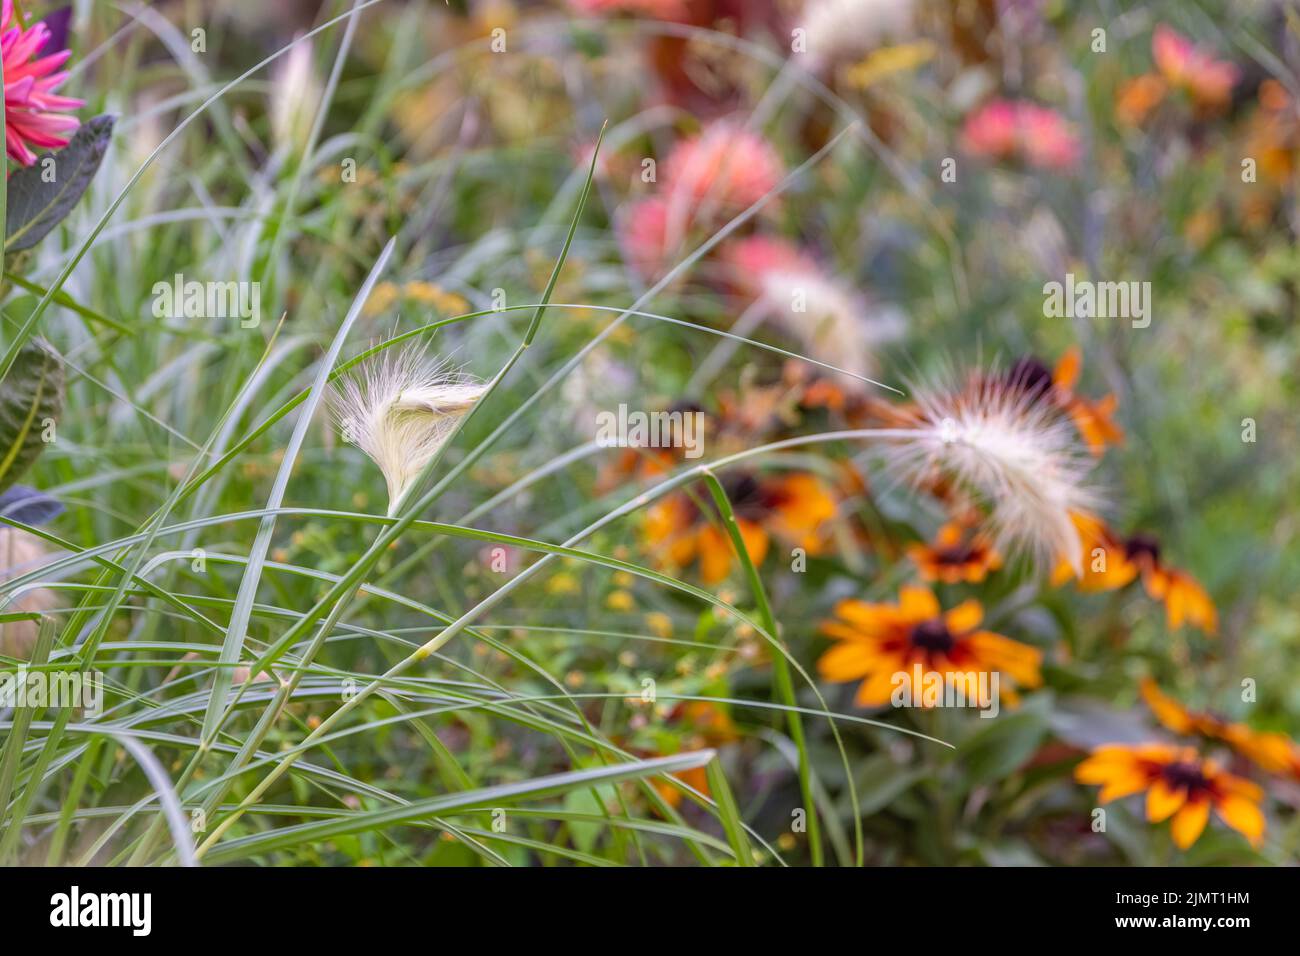 A closeup shot of Lygeum grass against a background of black-eyed Susan flowers in the garden Stock Photo